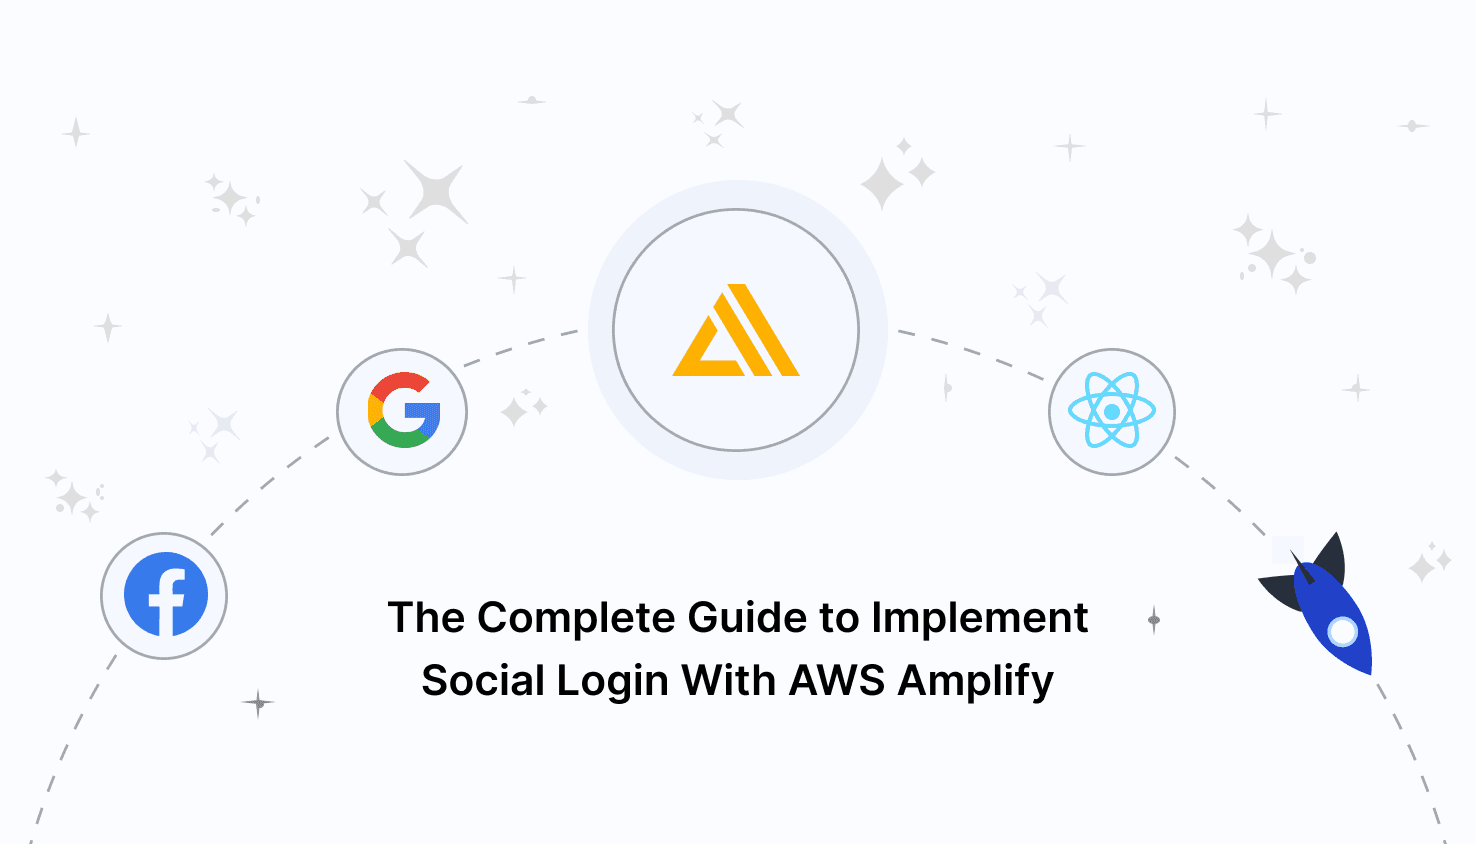 How to Add Facebook Login to Your Serverless App with SST Auth